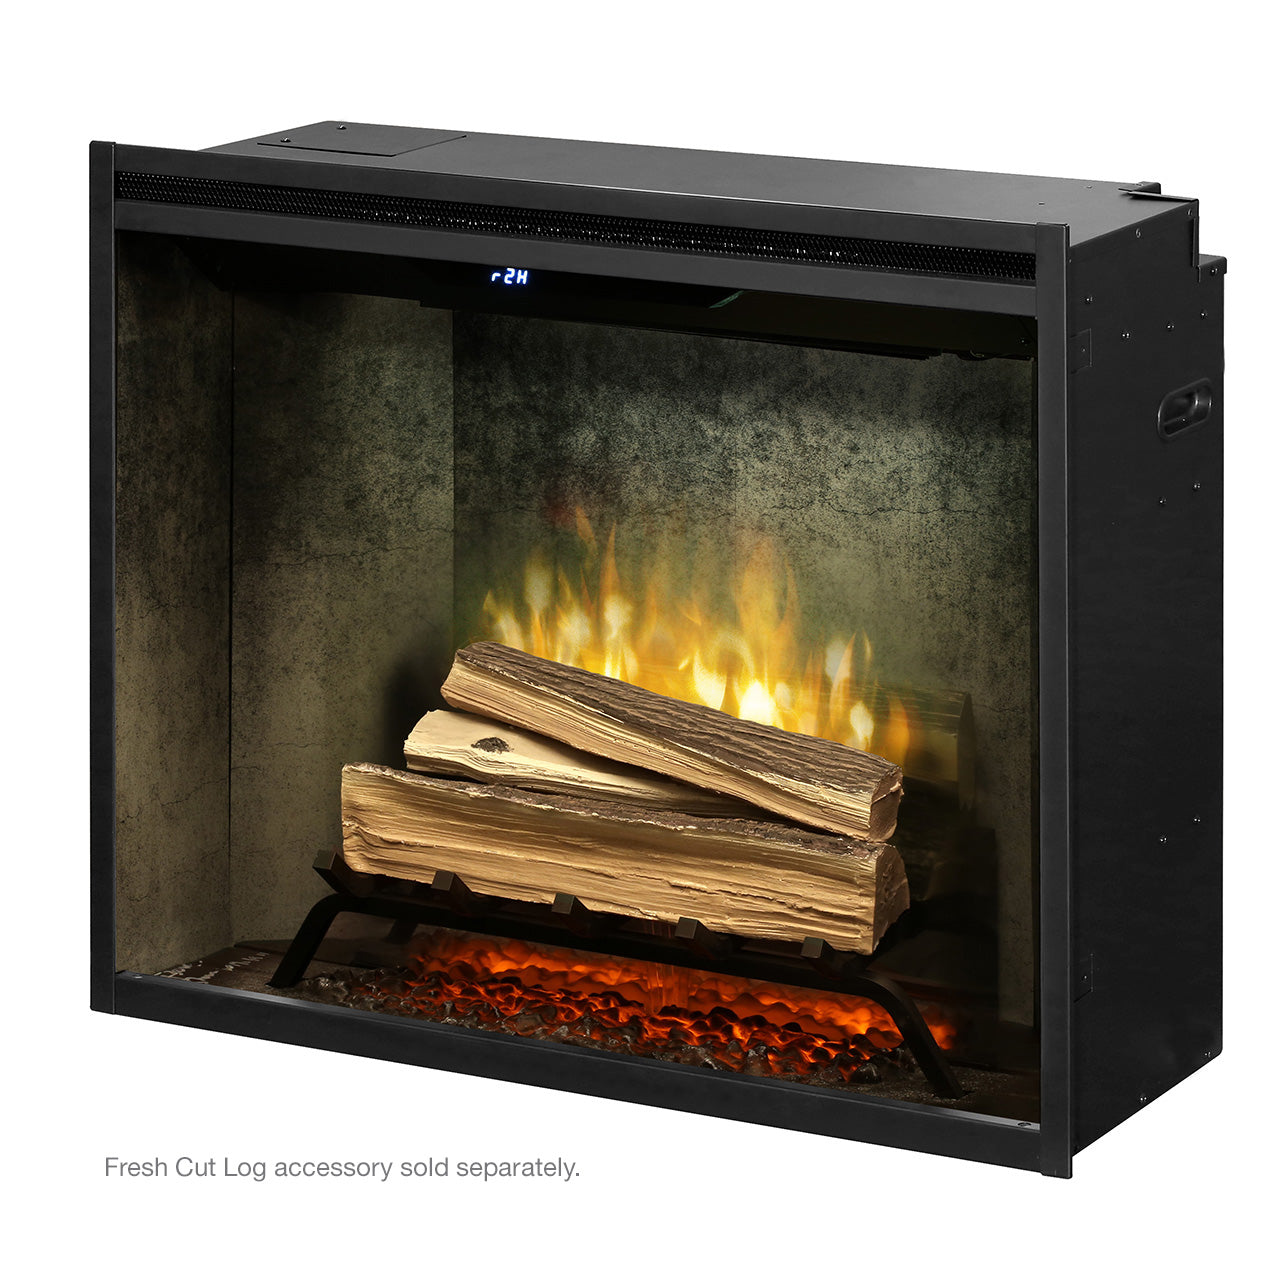 Dimplex Revillusion® 30" Built-in Electric Firebox in Weathered Concrete Liner - RBF30WC - Fireplace Choice